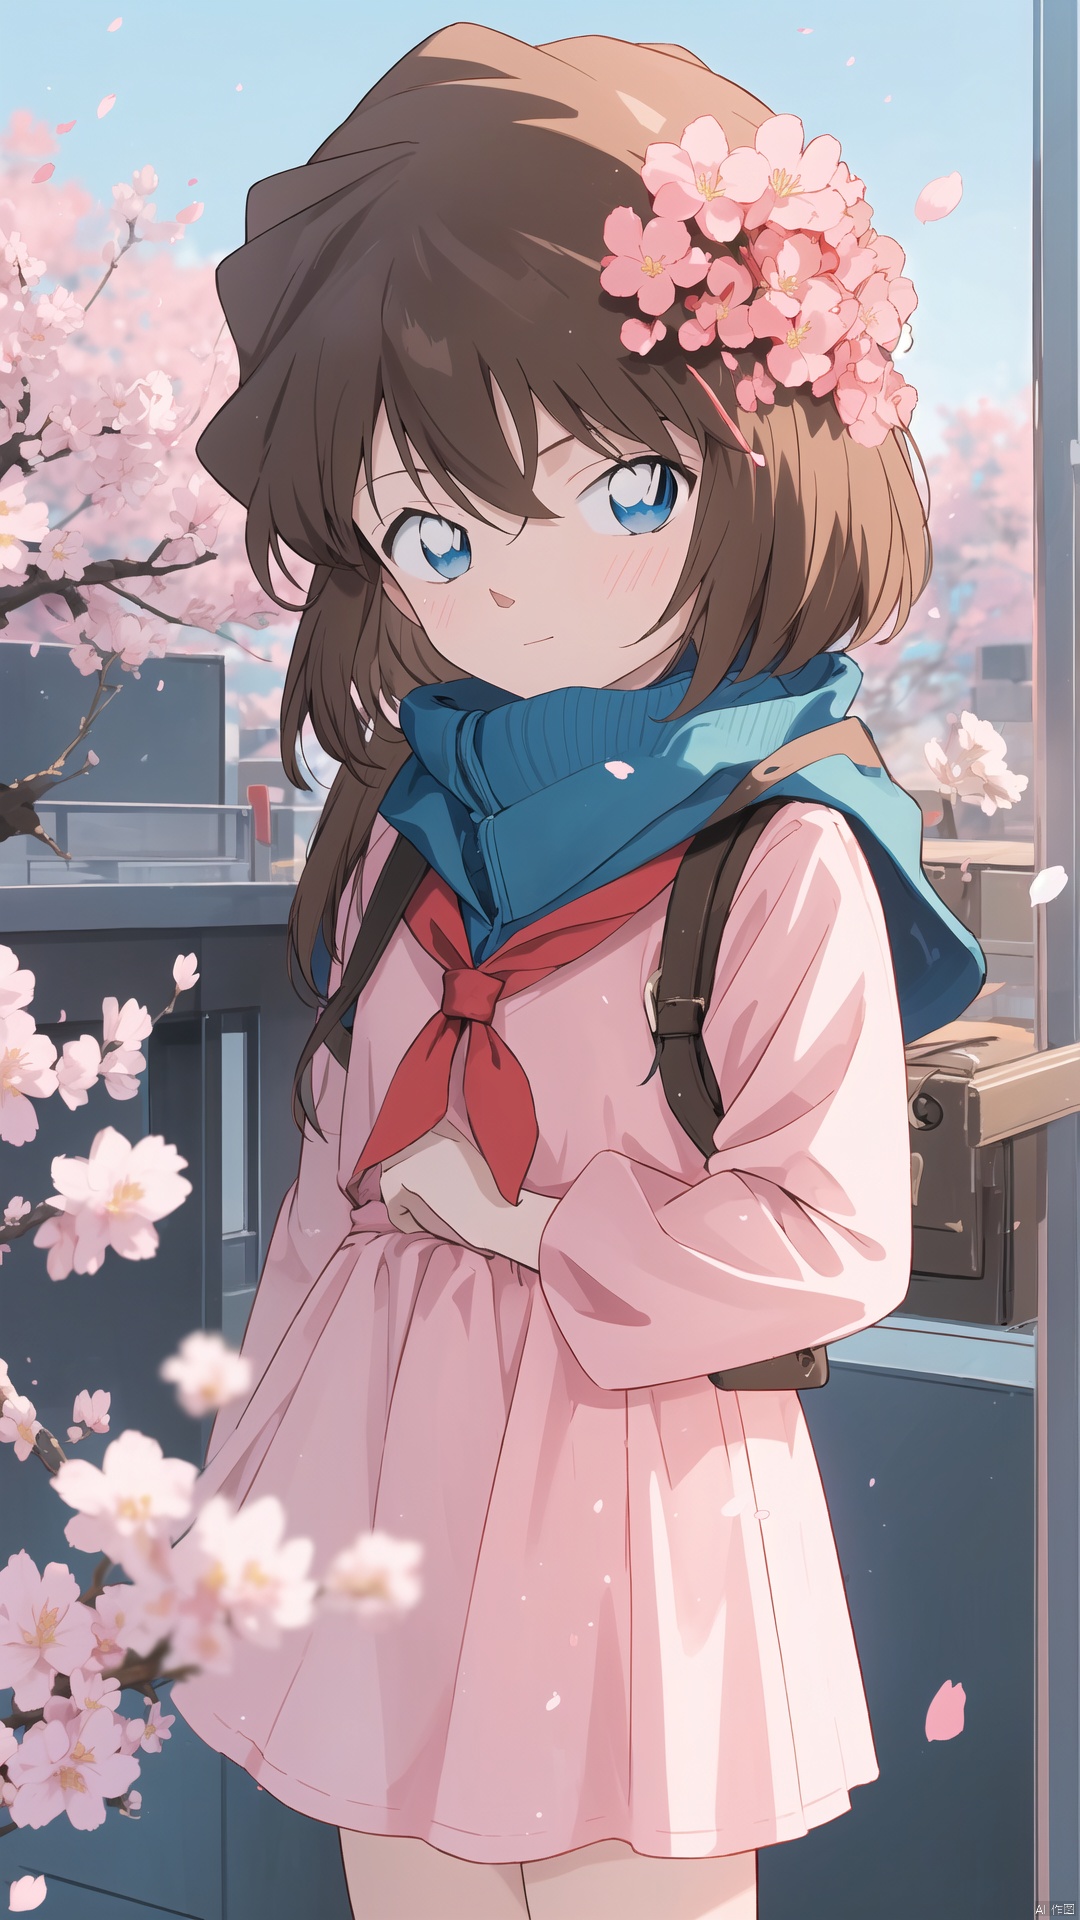  (((Short brown hair, blue eyes))), The image features a beautiful anime girl dressed in a flowing white and red dress, standing amidst a flurry of red cherry blossoms. The contrast between her white dress and the red flowers creates a striking visual effect. The lighting in the image is well-balanced, casting a warm glow on the girl and the surrounding flowers. The colors are vibrant and vivid, with the red cherry blossoms standing out against the white sky. The overall style of the image is dreamy and romantic, perfect for a piece of anime artwork. The quality of the image is excellent, with clear details and sharp focus. The girl's dress and the flowers are well-defined, and the background is evenly lit, without any harsh shadows or glare. From a technical standpoint, the image is well-composed, with the girl standing in the center of the frame, surrounded by the blossoms. The use of negative space in the background helps to draw the viewer's attention to the girl and the flowers. The cherry blossoms, often associated with transience and beauty, further reinforce this theme. The girl, lost in her thoughts, seems to be contemplating the fleeting nature of beauty and the passage of time. Overall, this is an impressive image that showcases the photographer's skill in capturing the essence of a scene, as well as their ability to create a compelling narrative through their art.catgirl,loli, kanade, (\shen ming shao nv\), cozy anime, 1girl, solo, long hair, looking at viewer, hair, blurry, blurry background, blush, bangs, depth of field,cuteloli,solo,long hair,blue eyes,shirt,hair between eyes,very long hair,blue hair,standing,jacket,,shorts,school_girl,schooluniform,blue jacket,track jacket,, kanade,HaibaraAi,哀, haibara ai